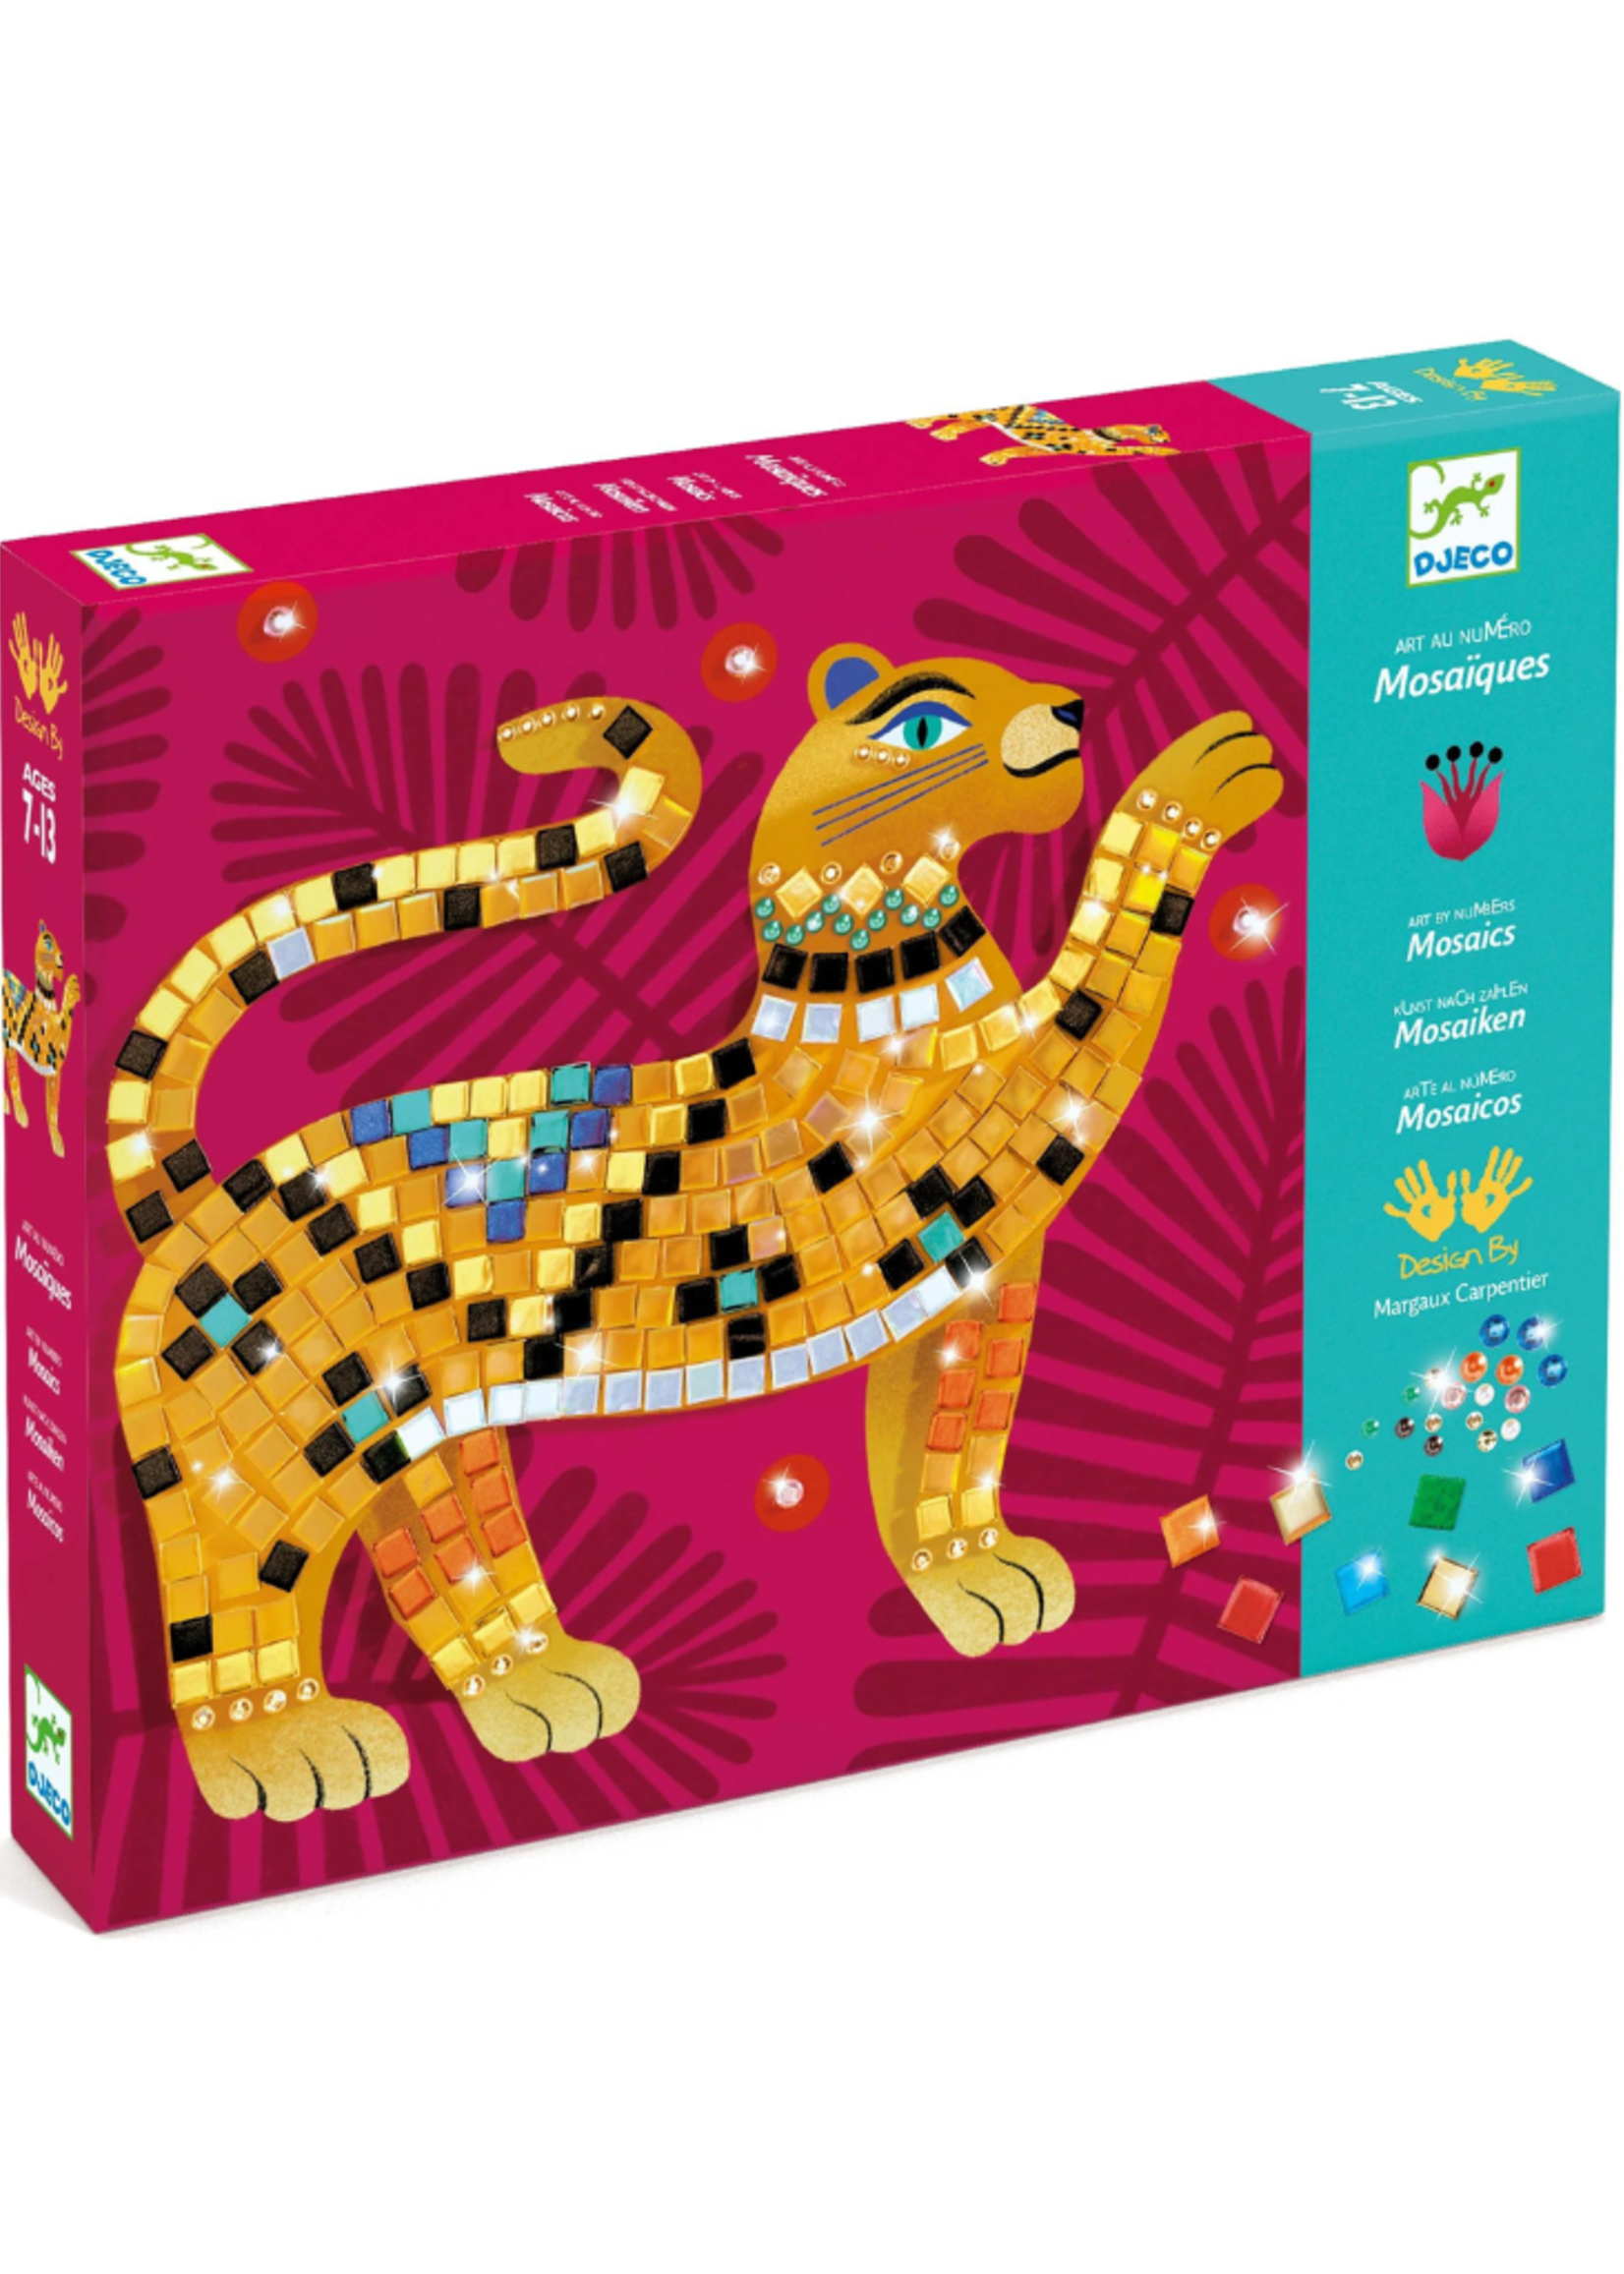 Djeco Deep in the Jungle Sticker and Jewel Mosaic Craft Kit